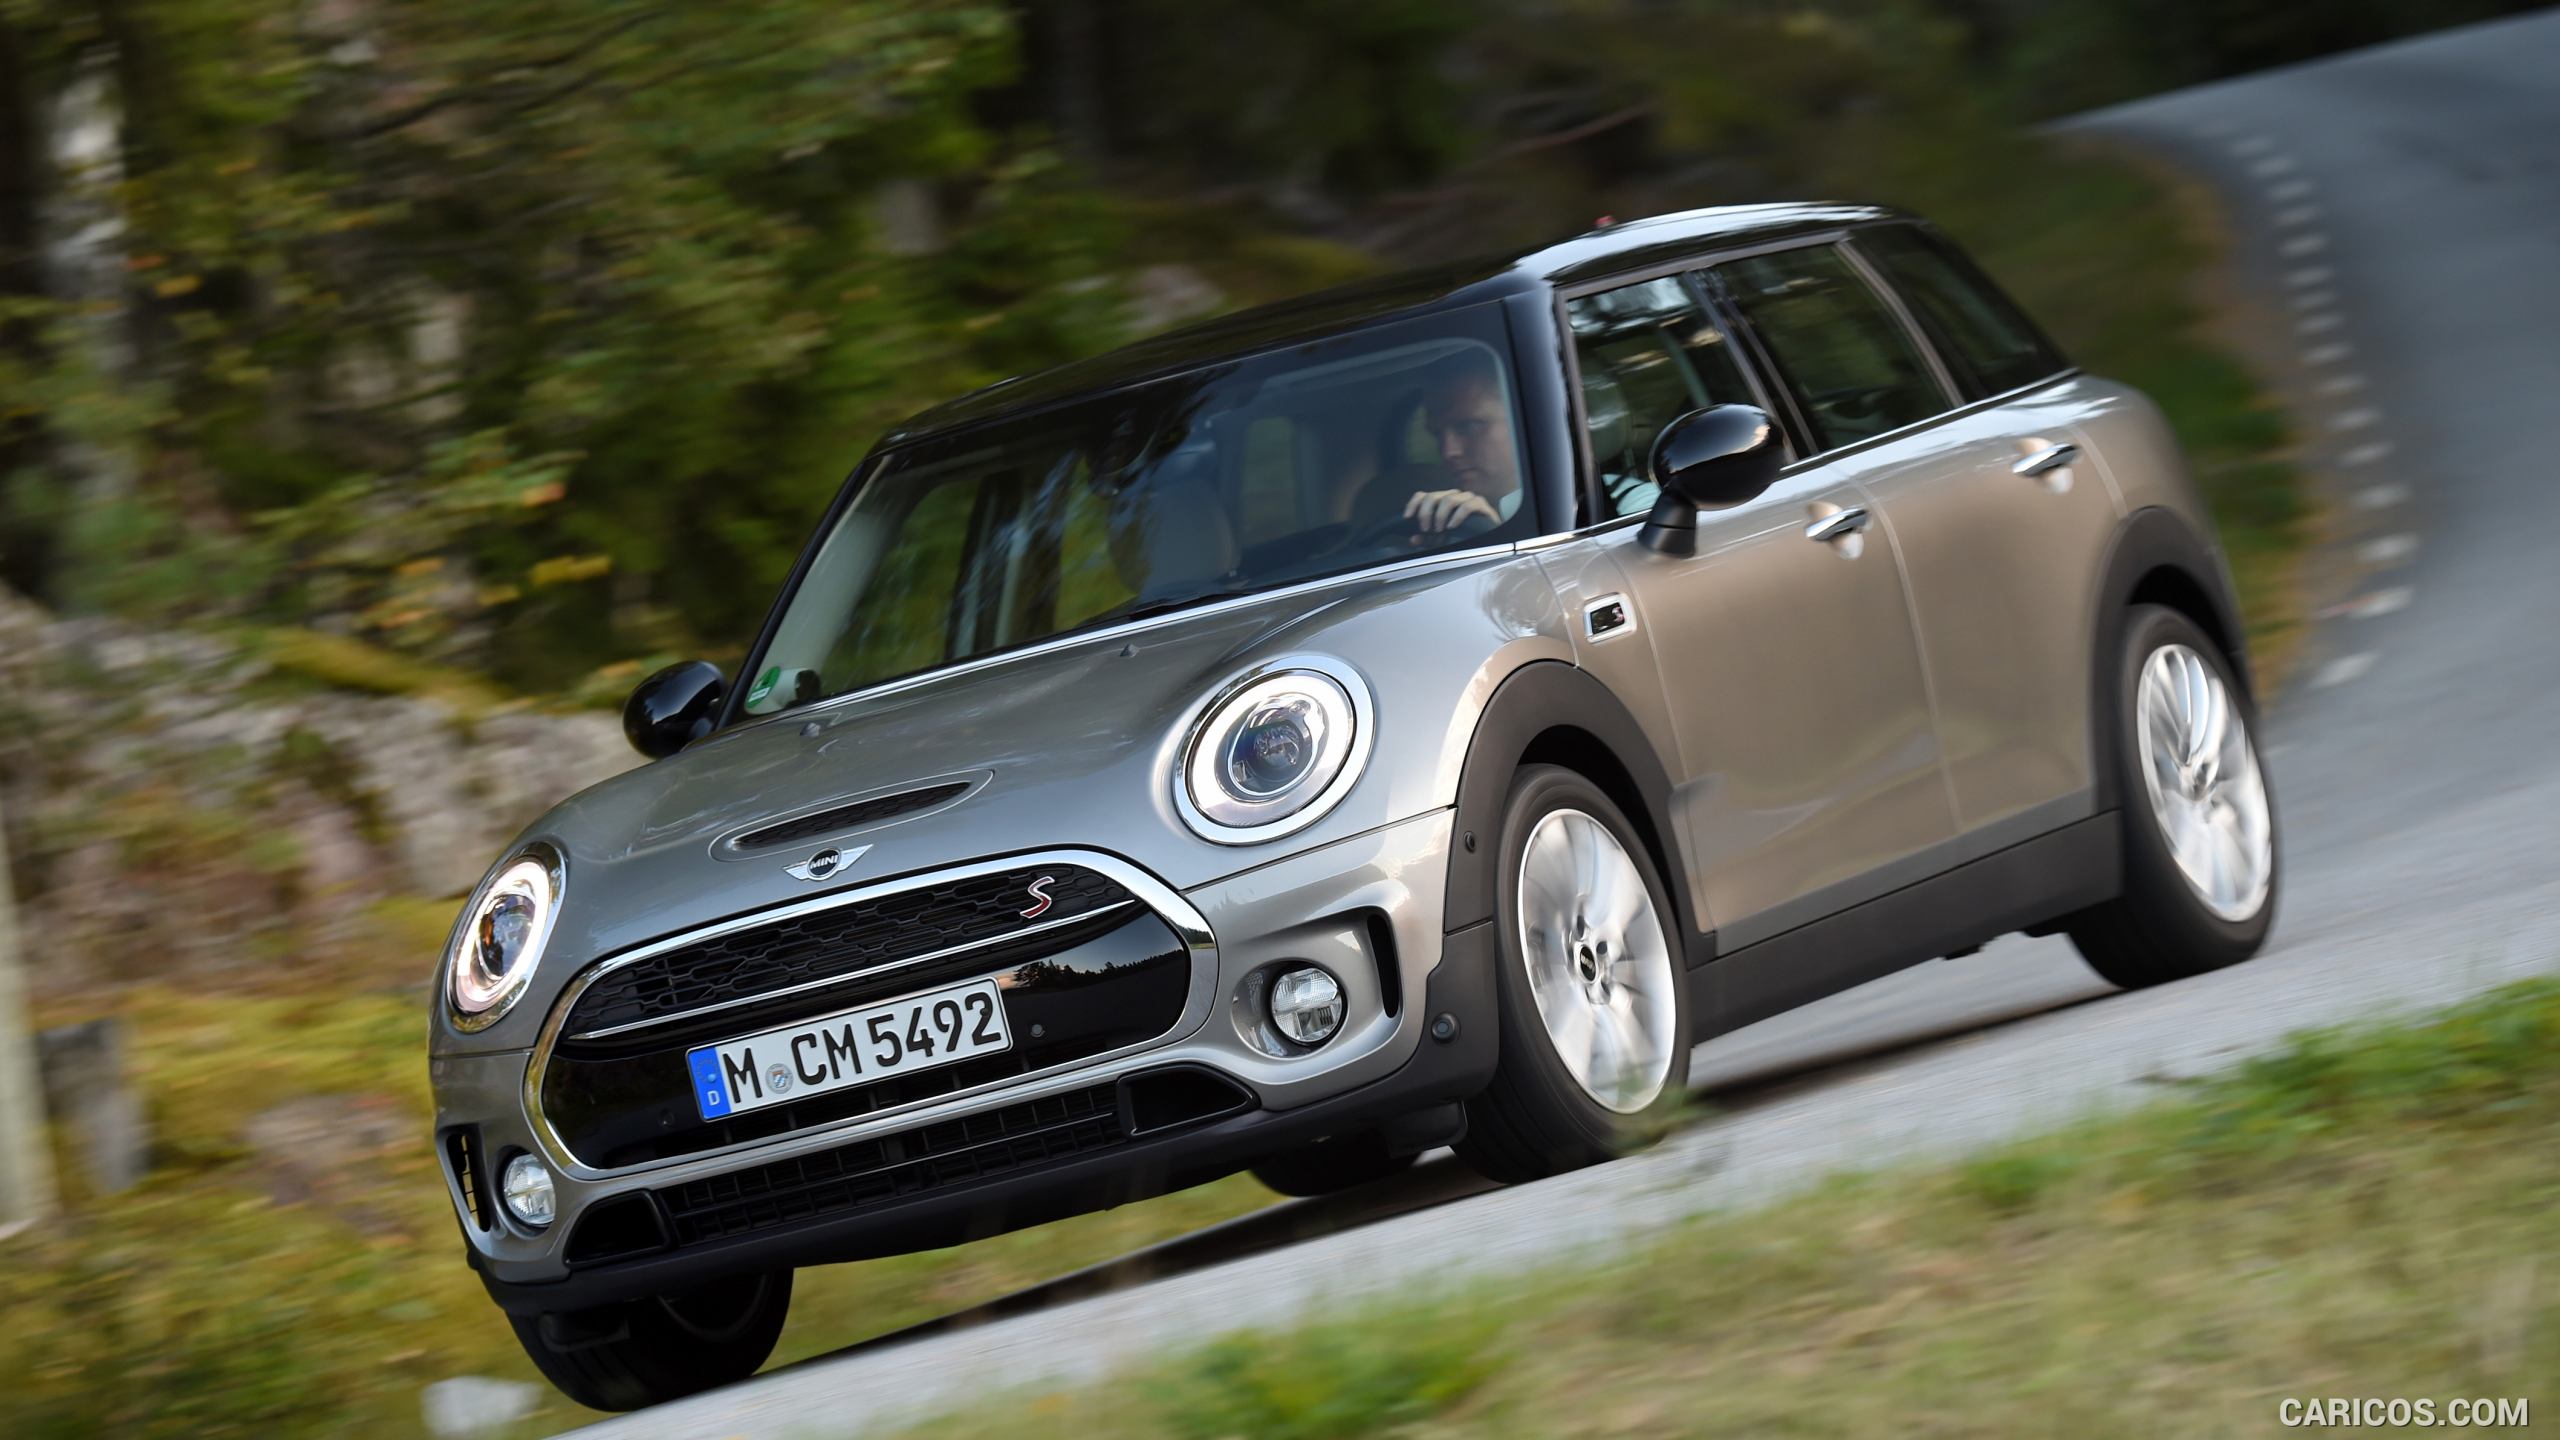 2016 MINI Cooper S Clubman in Metallic Melting Silver - Front, #135 of 380